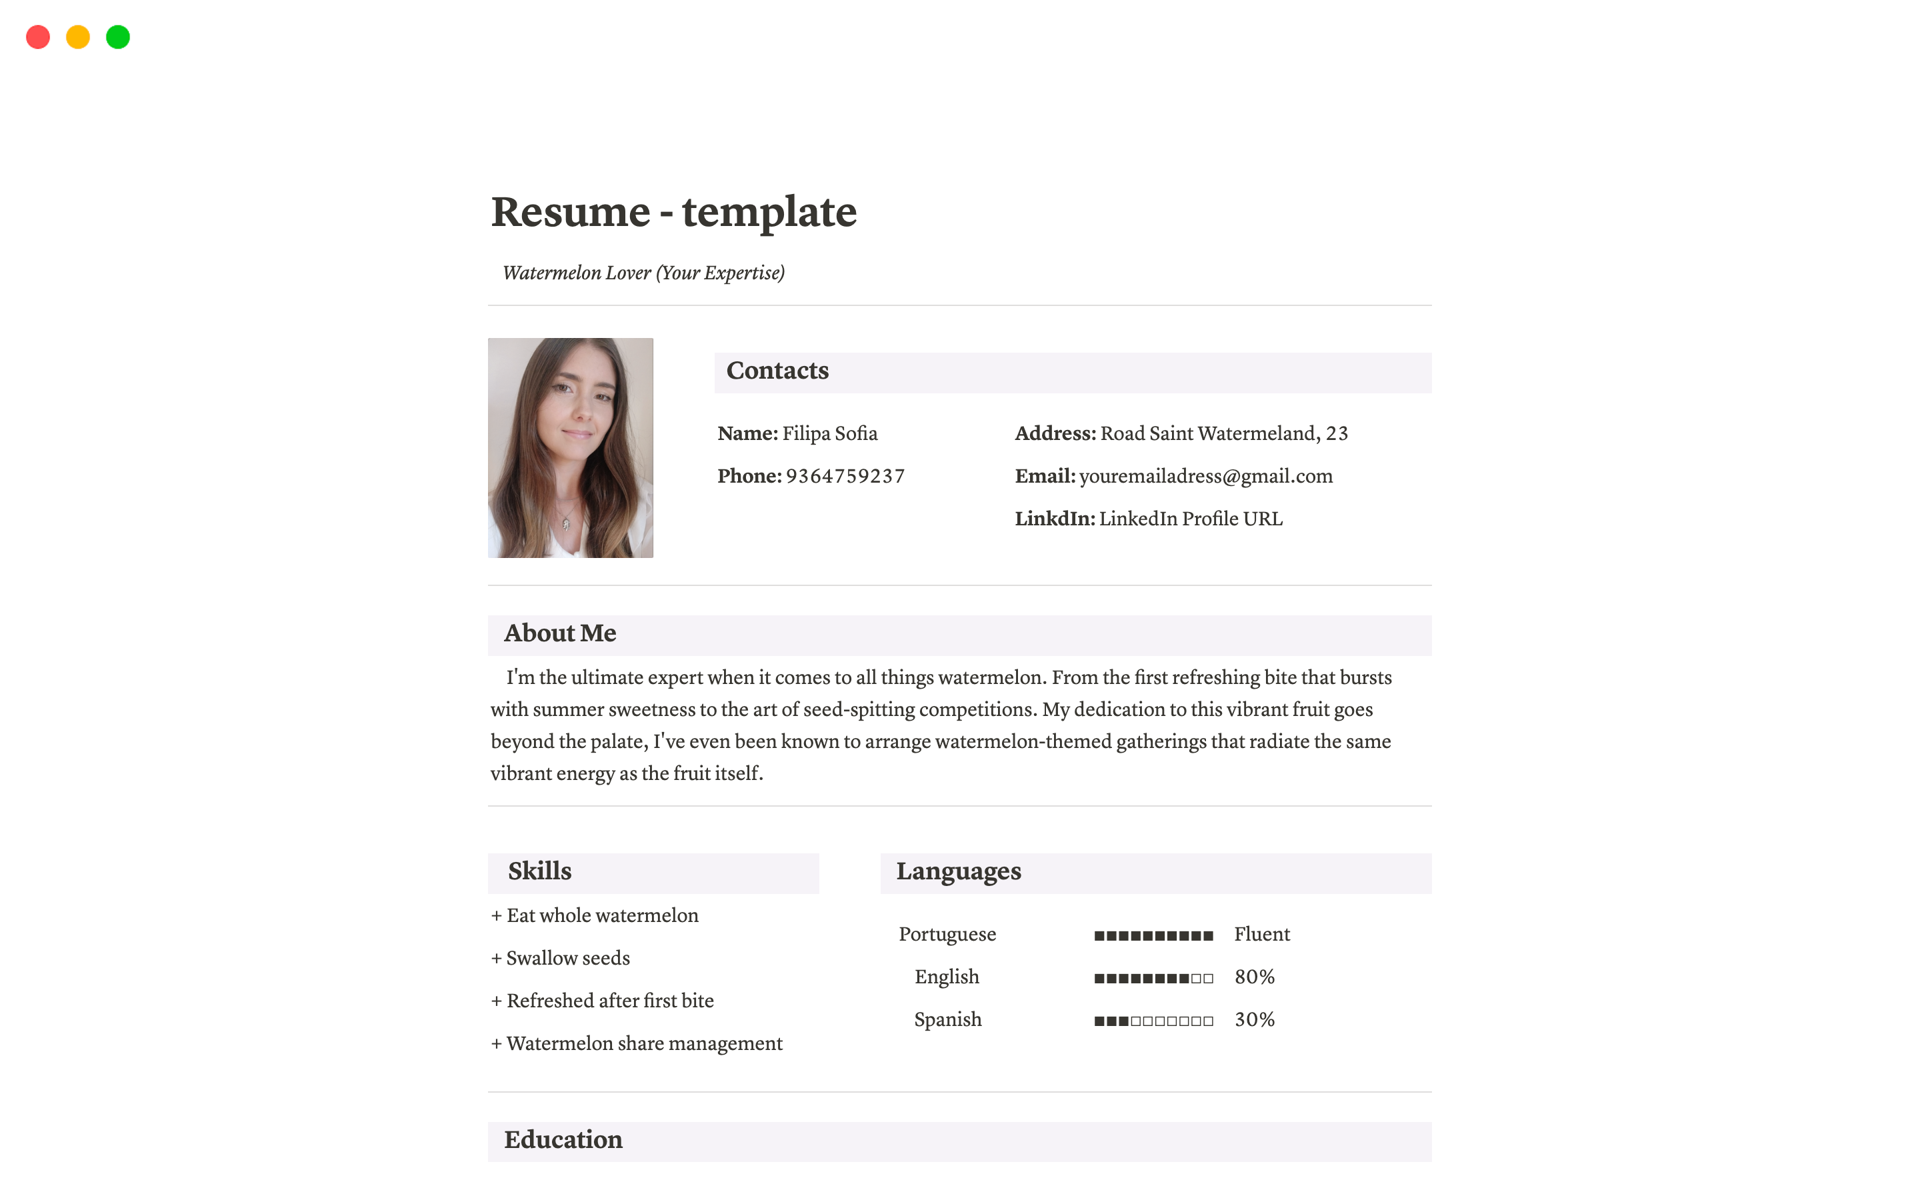 A template preview for Resumé